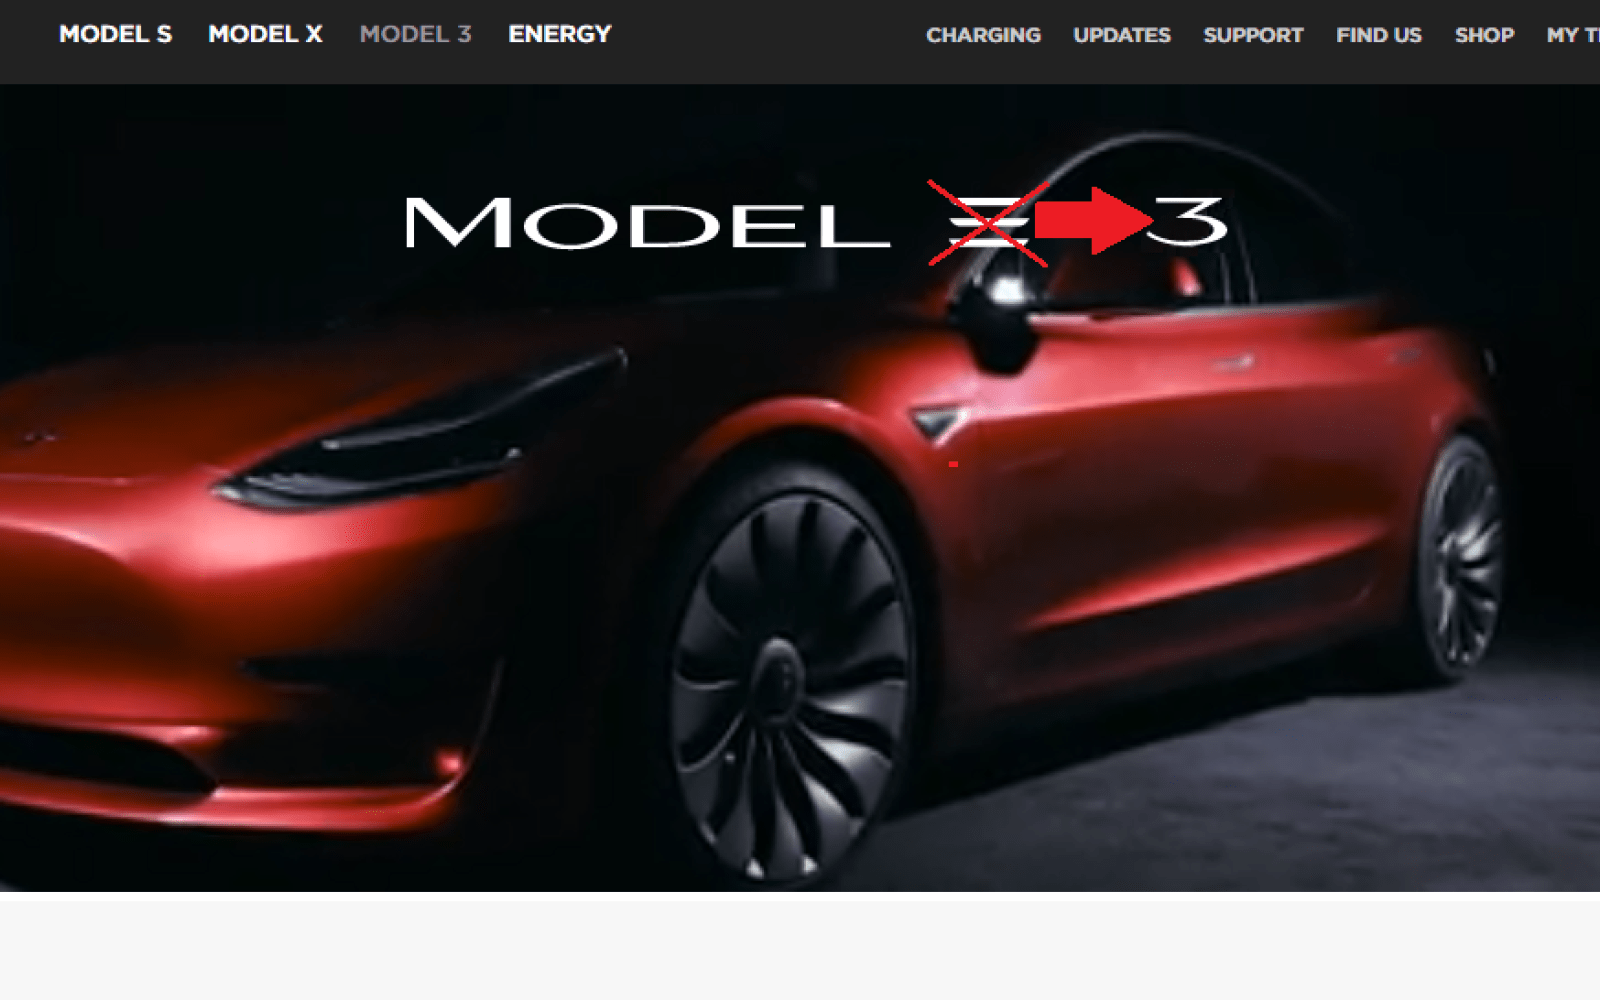 Tesla Auto Logo - Tesla changes the branding of the Model 3 to remove the '3 lines